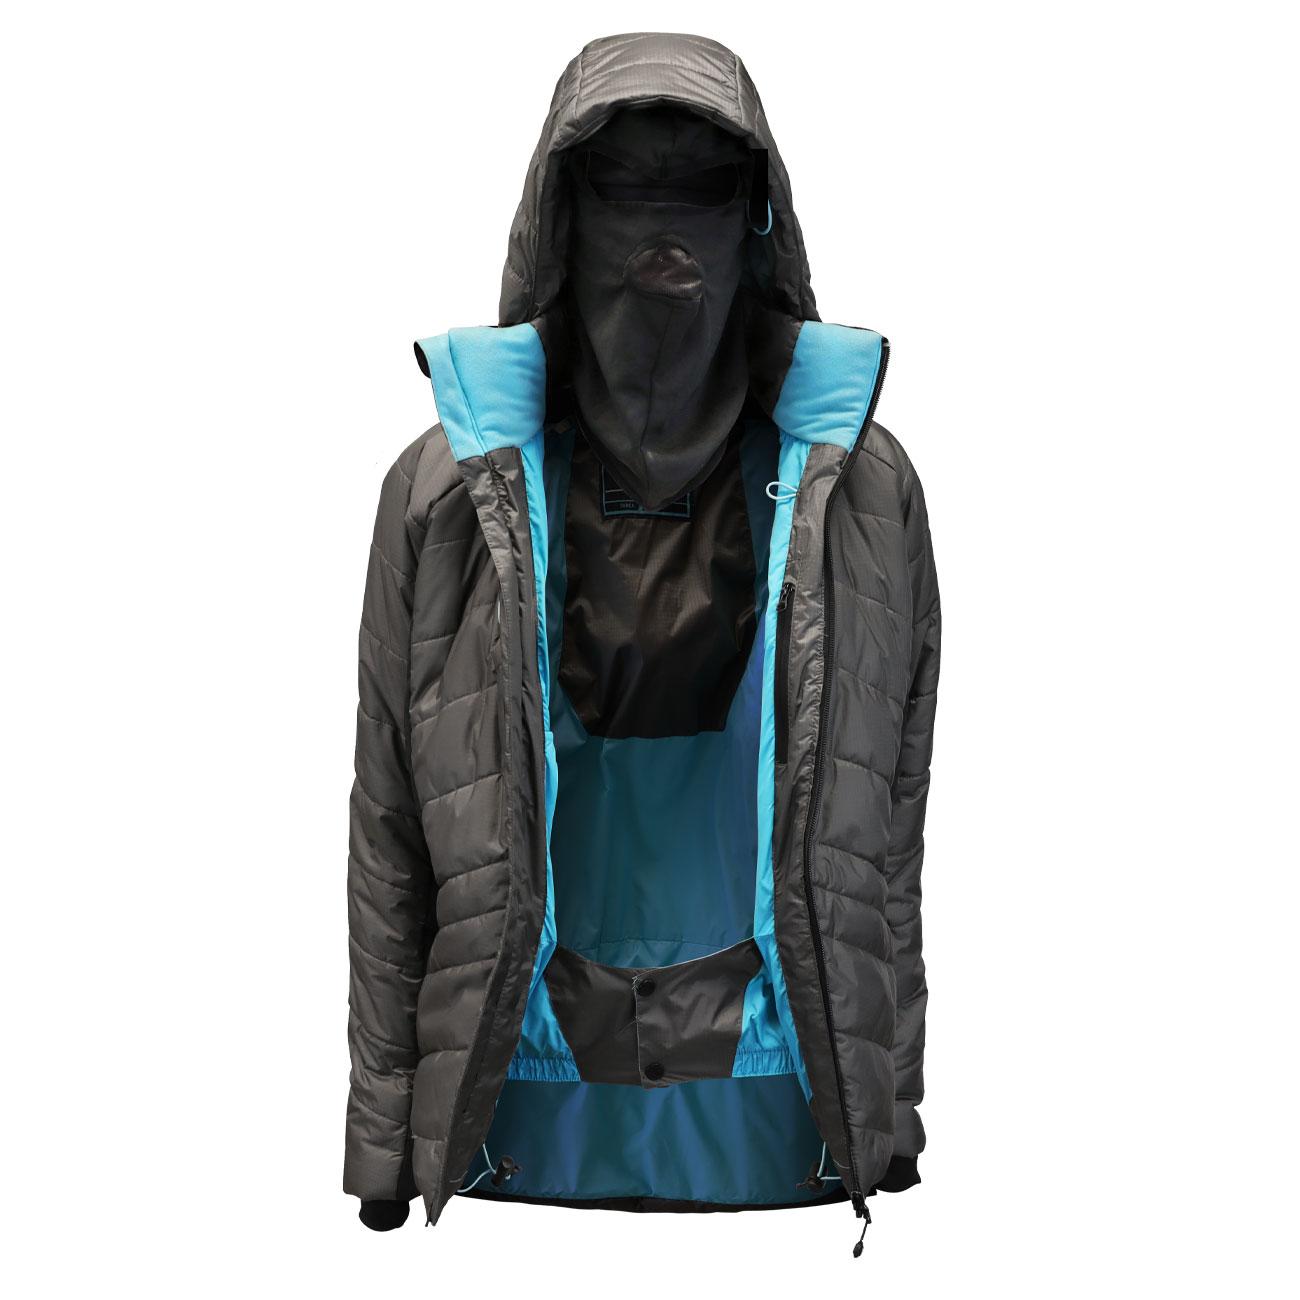 Parka Thinsulate Mujer Gris/Negro Z-9100